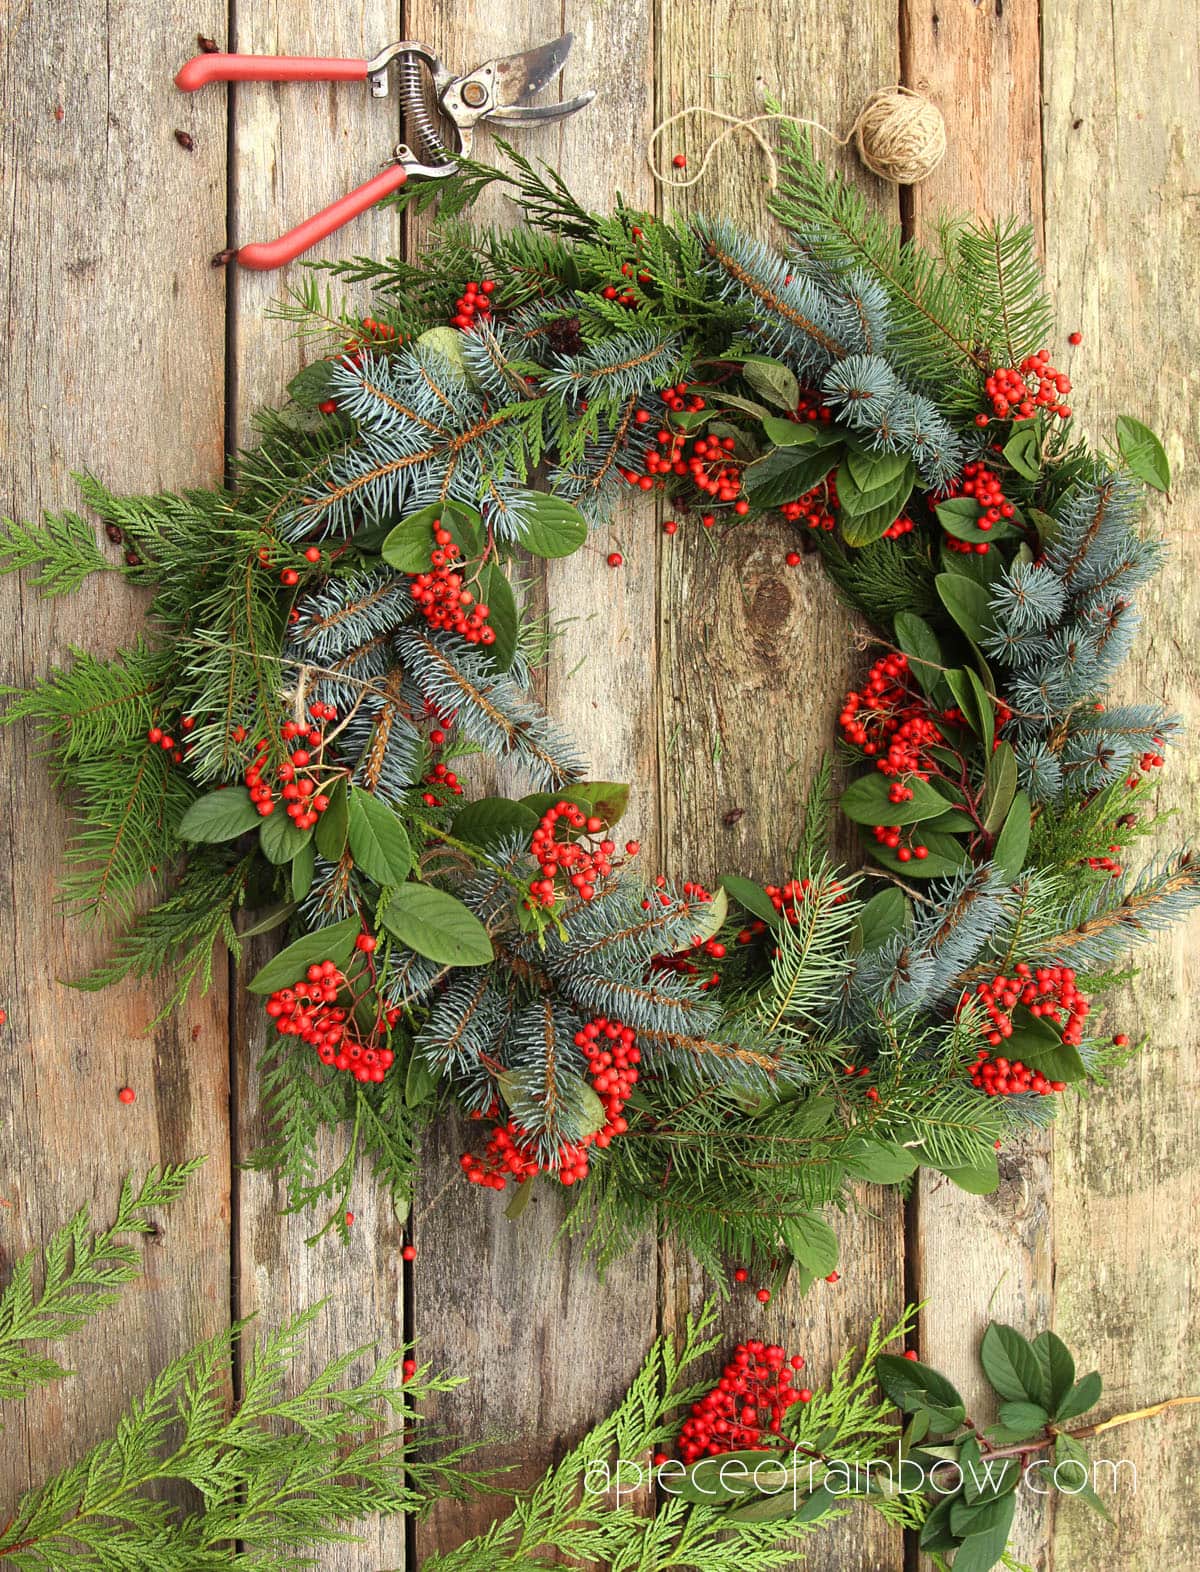 Make a Fresh Christmas Wreath in 20 Minutes - A Piece Of Rainbow